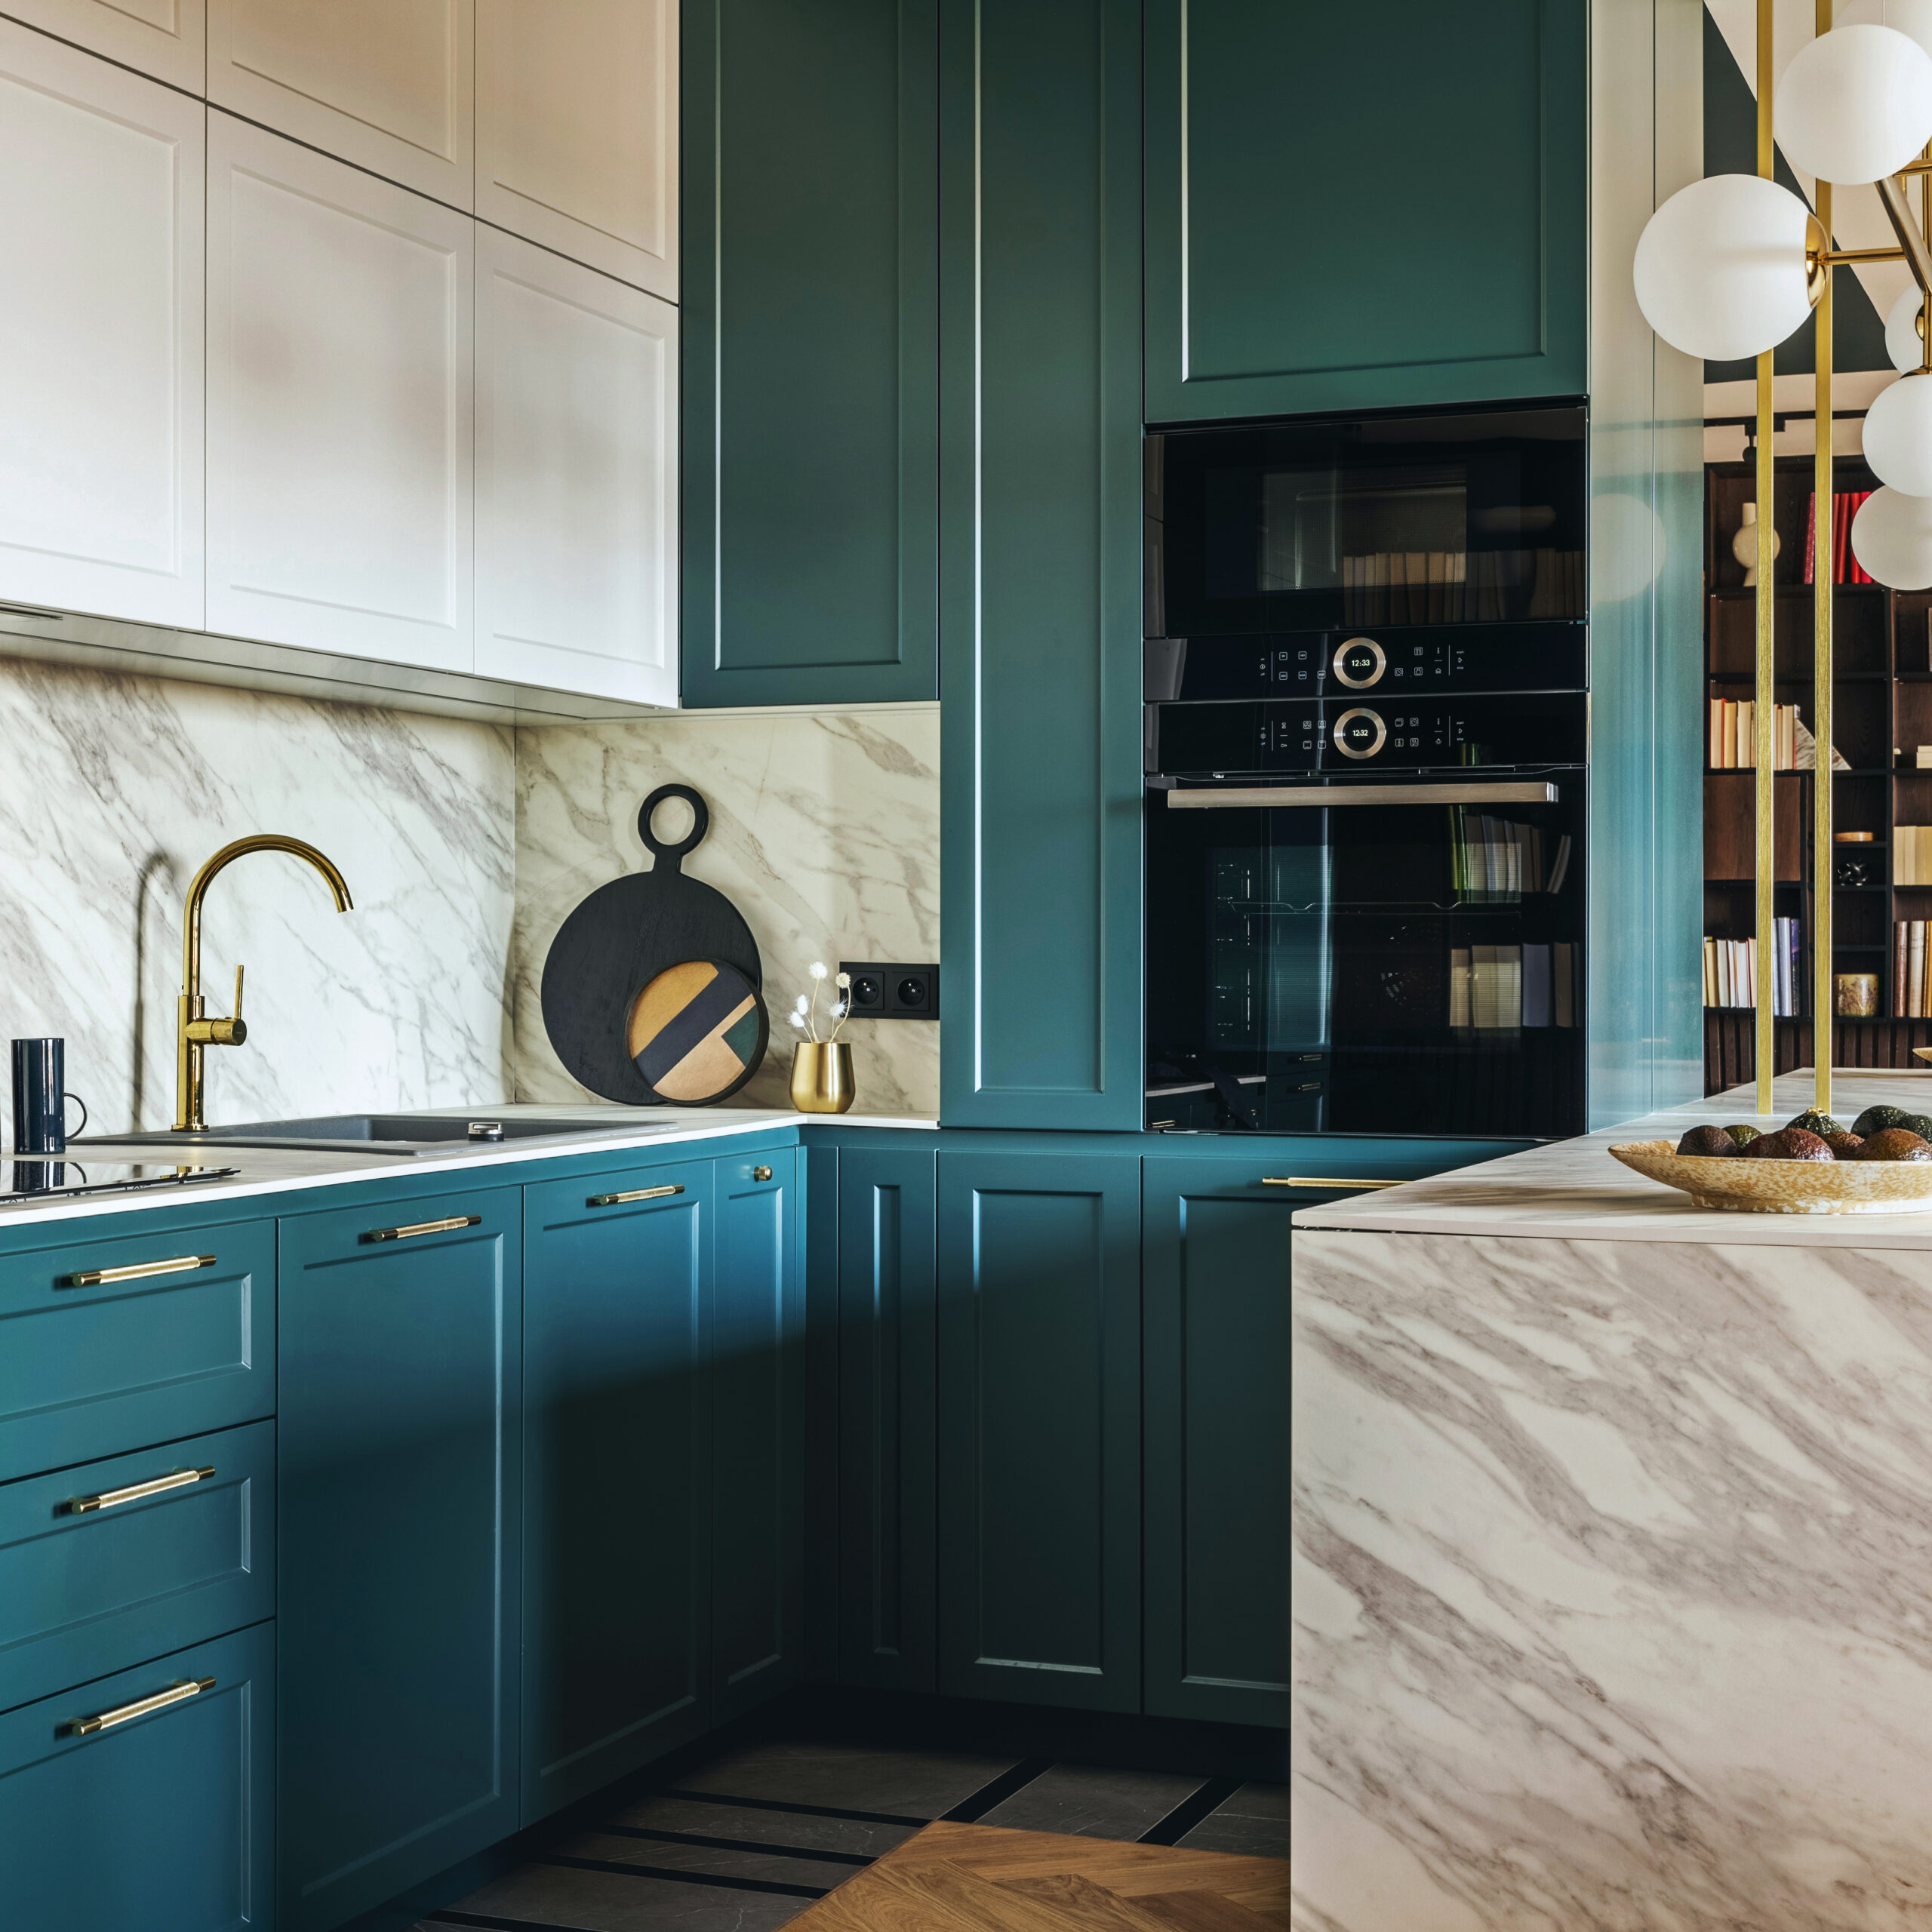 Newmarket kitchen cabinet painting and refinishing project with vibrant turquoise and white color scheme, adding a lively and refreshing touch to the culinary space.